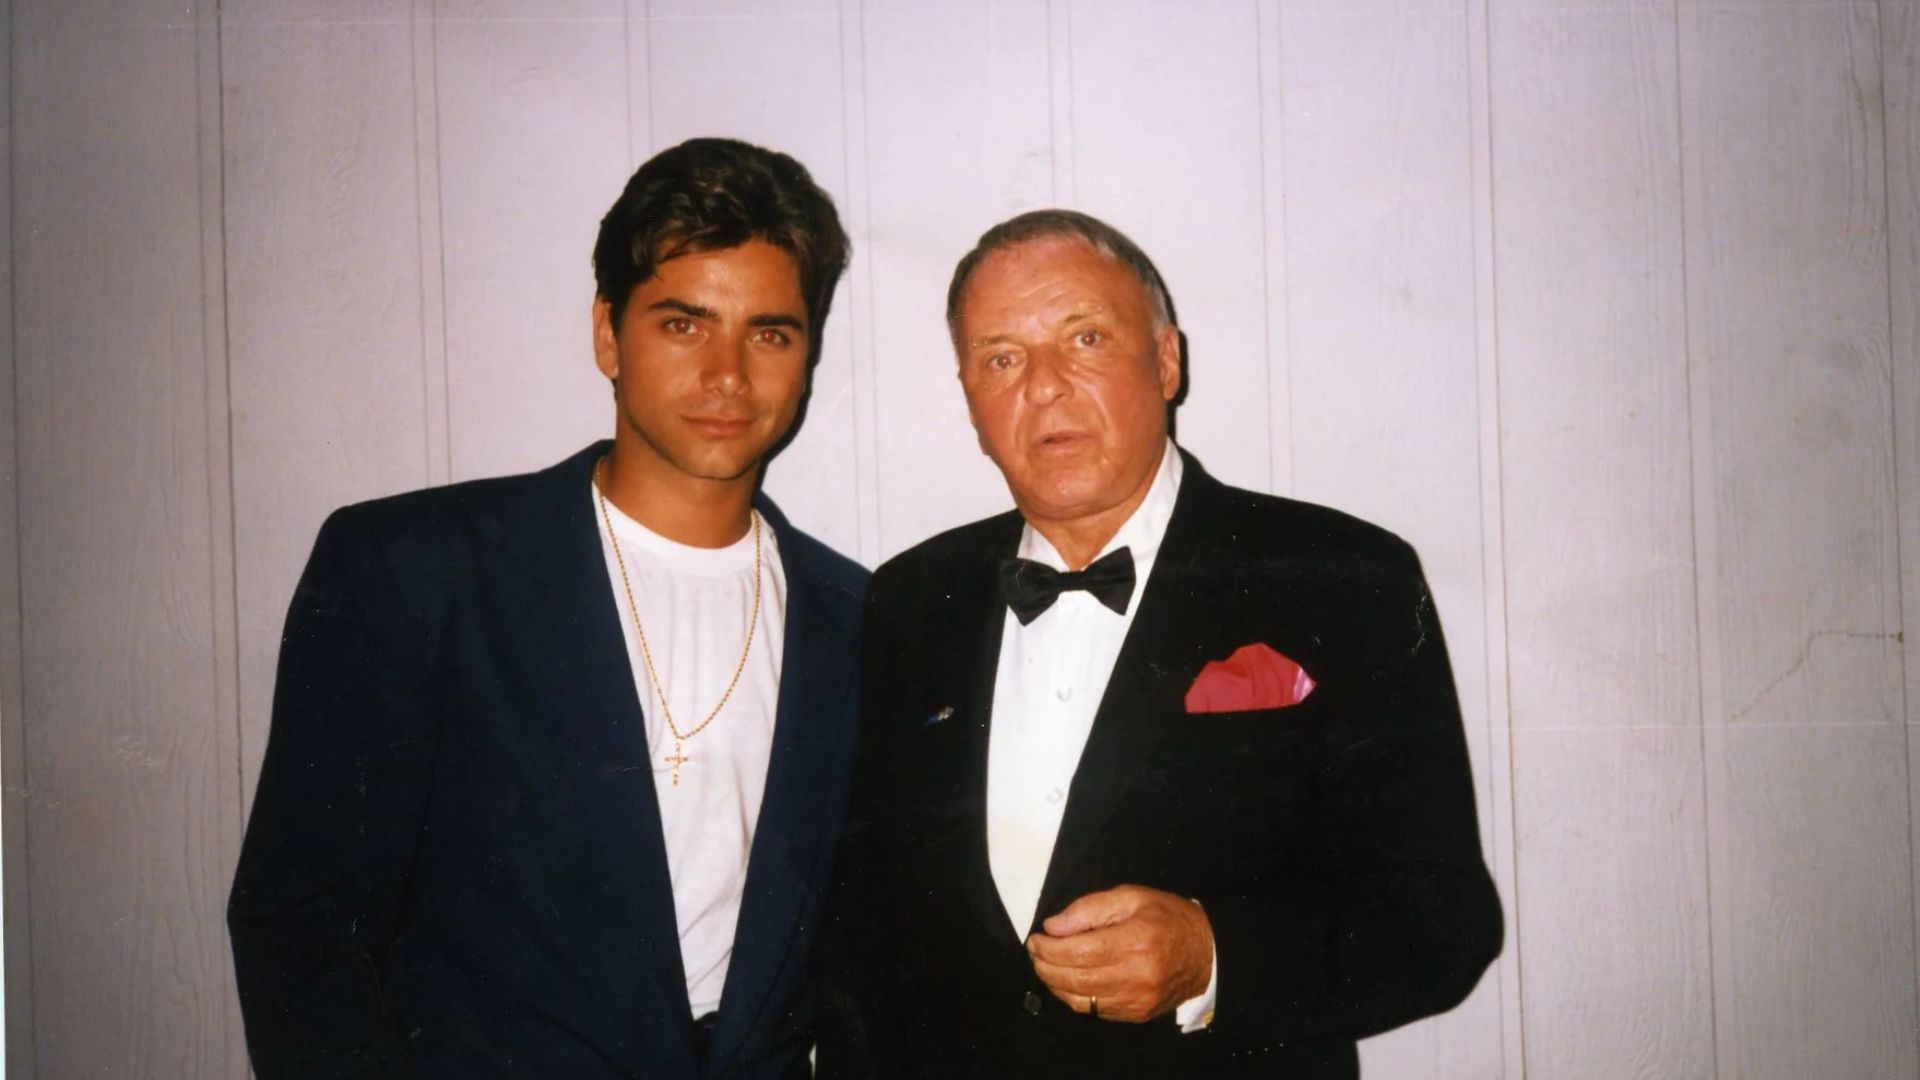 Frank Sinatra Jr. With His Father